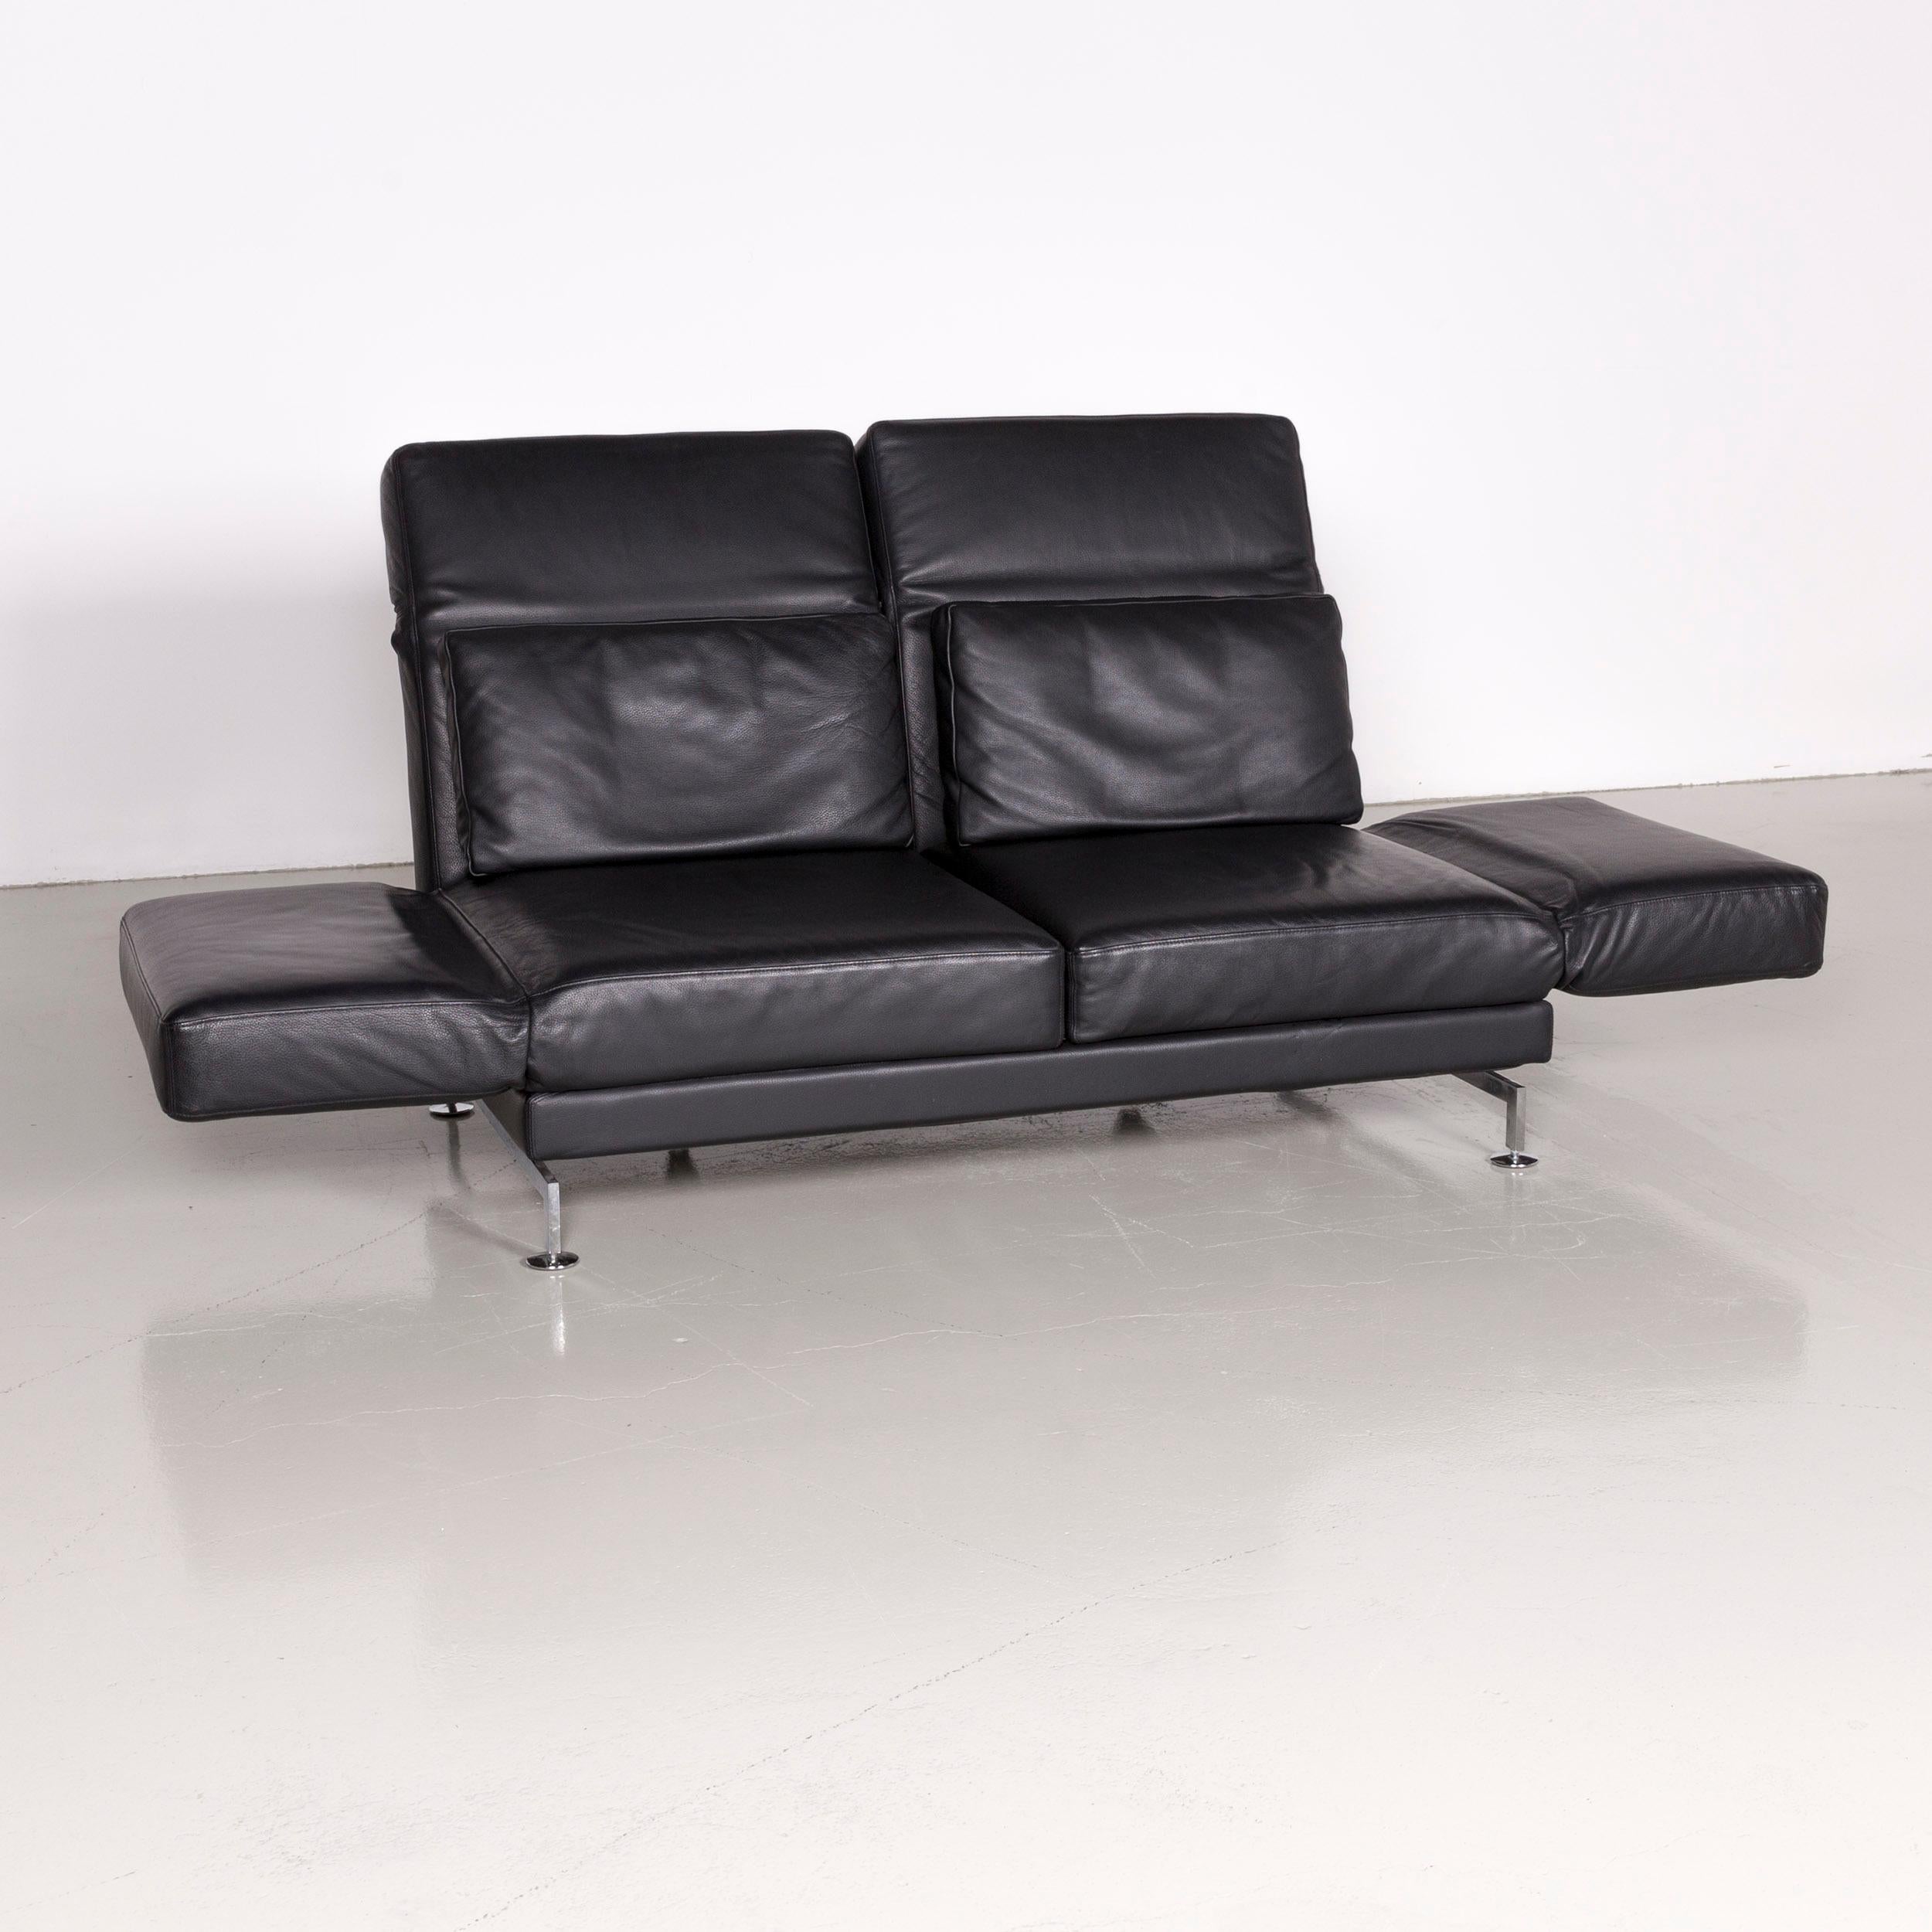 We bring to you a Brühl & Sippold moule designer leather sofa black two-seat couch with function.











